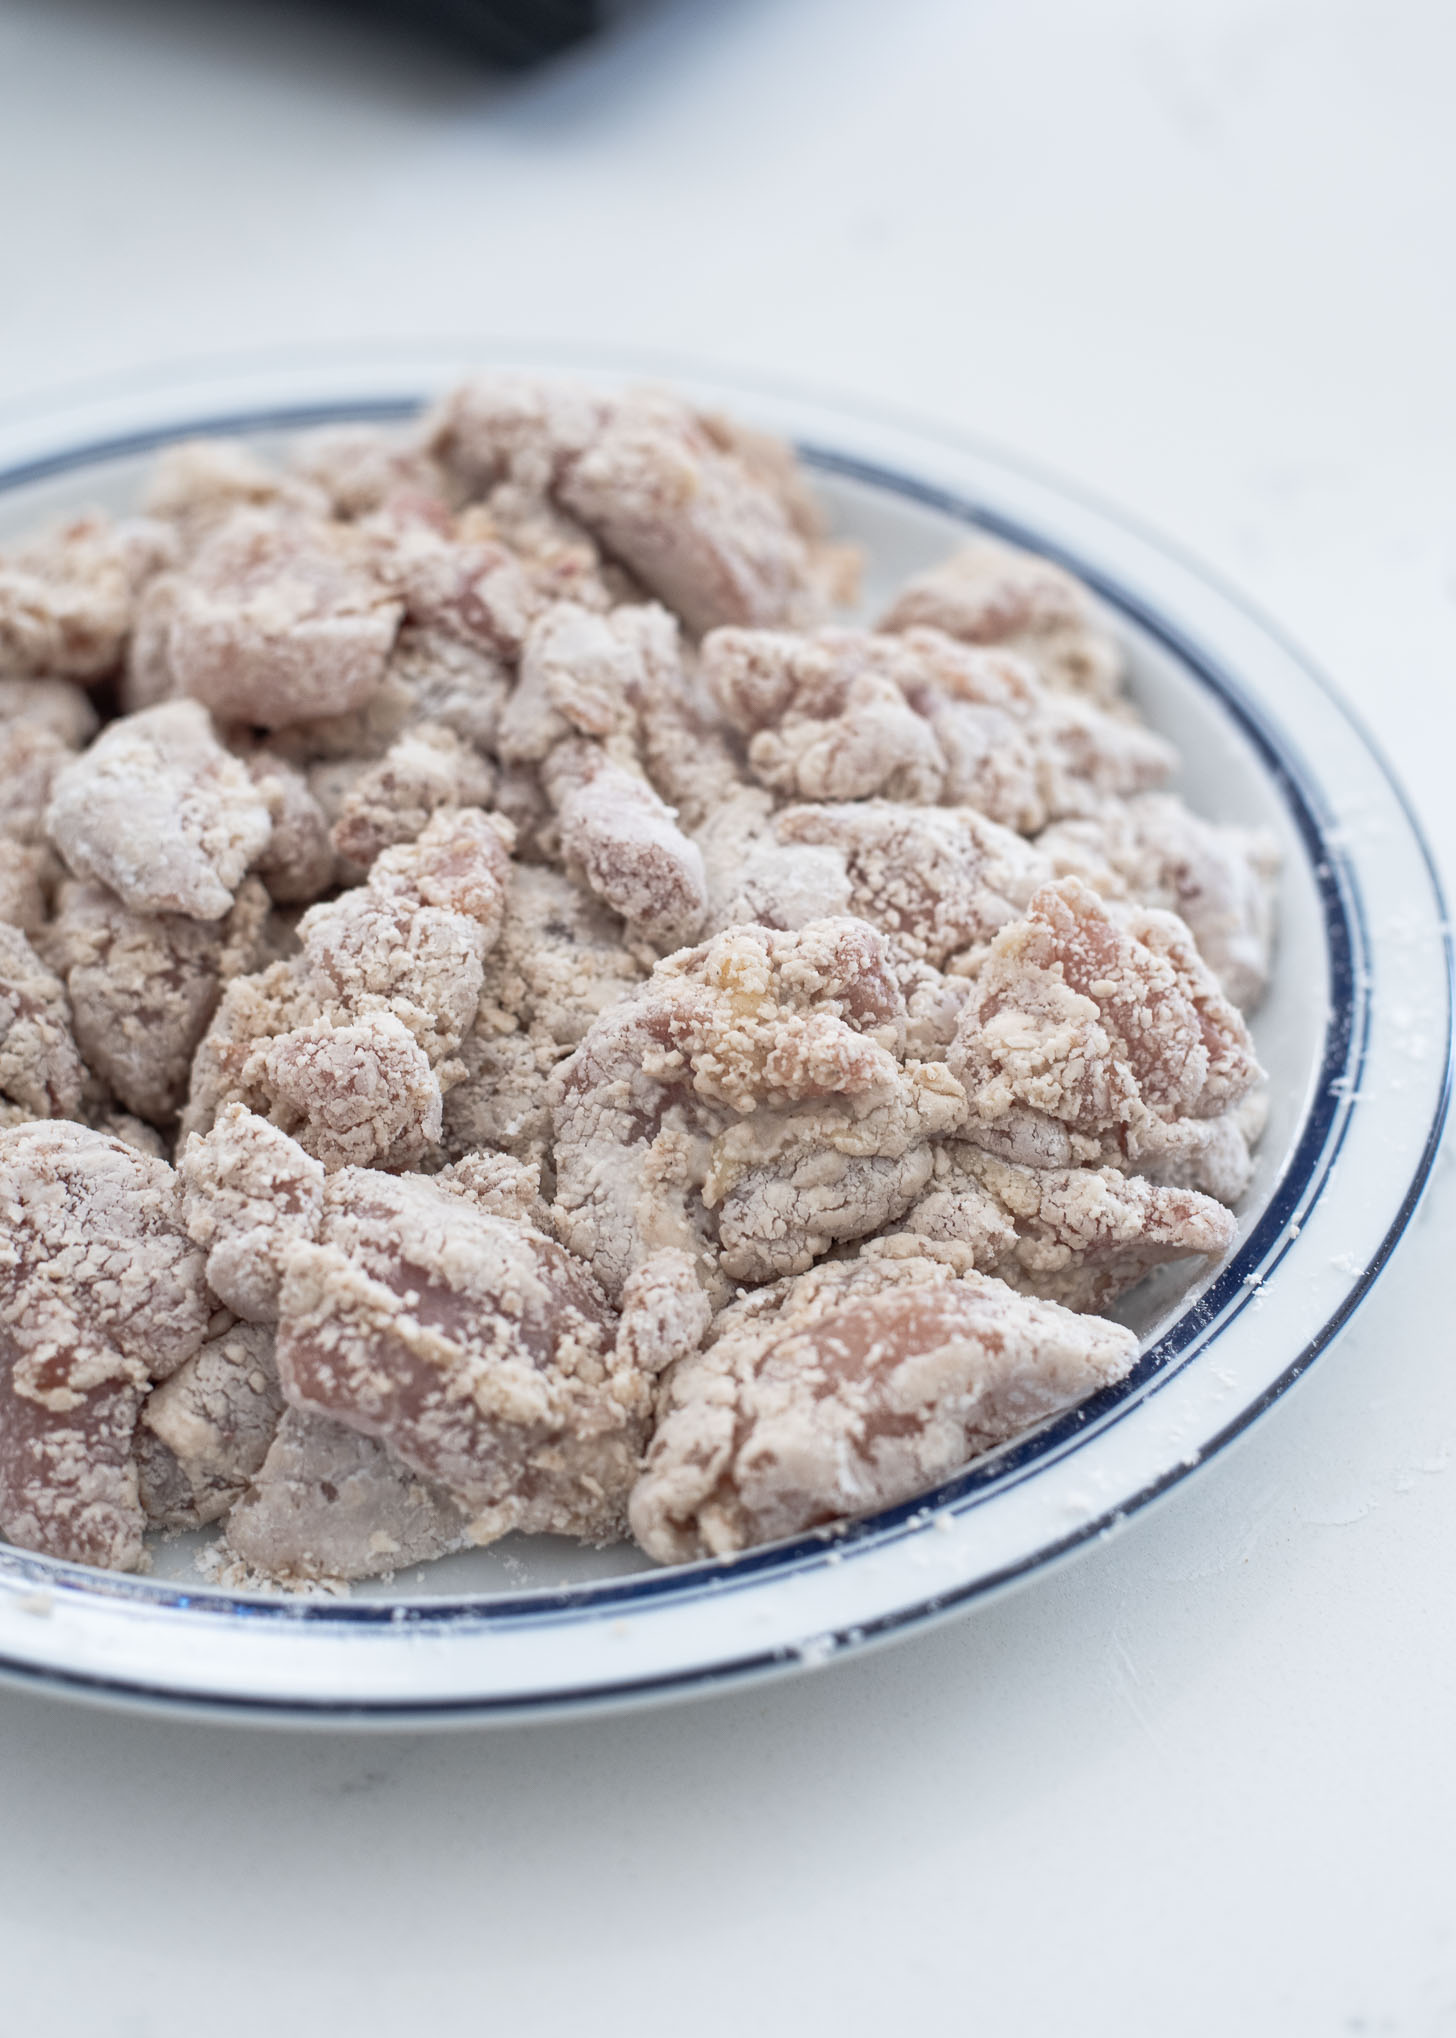 Chicken pieces coated with coarse sweet potato starch are ready for deep-frying.